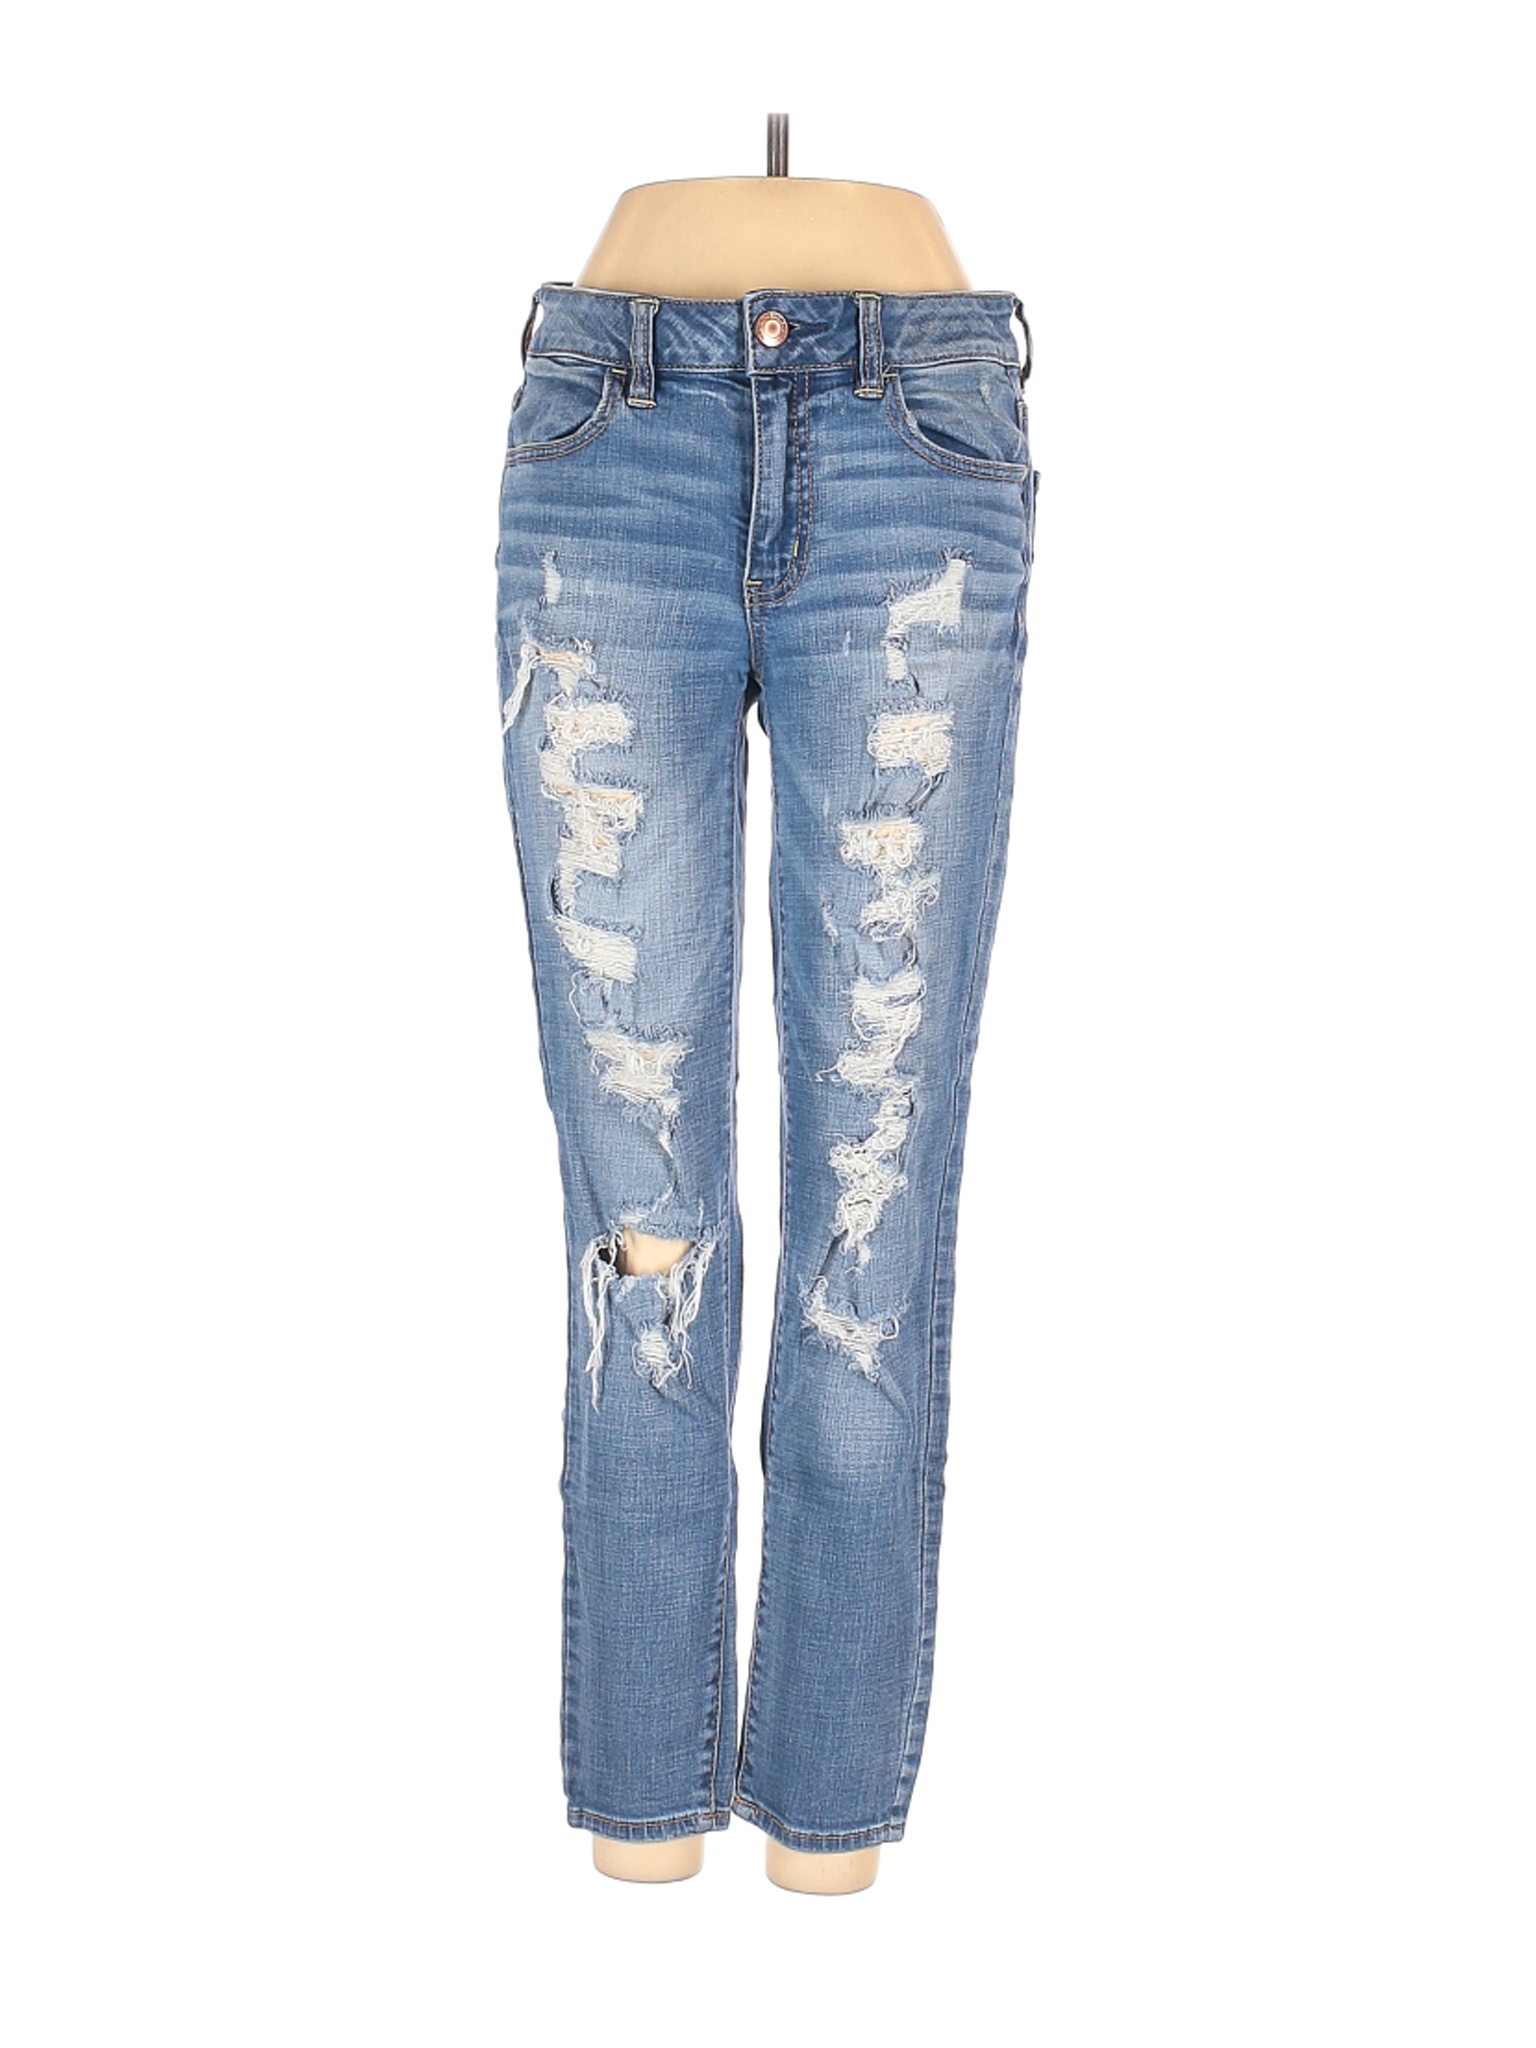 American Eagle Outfitters Women Blue Jeans 4 | eBay